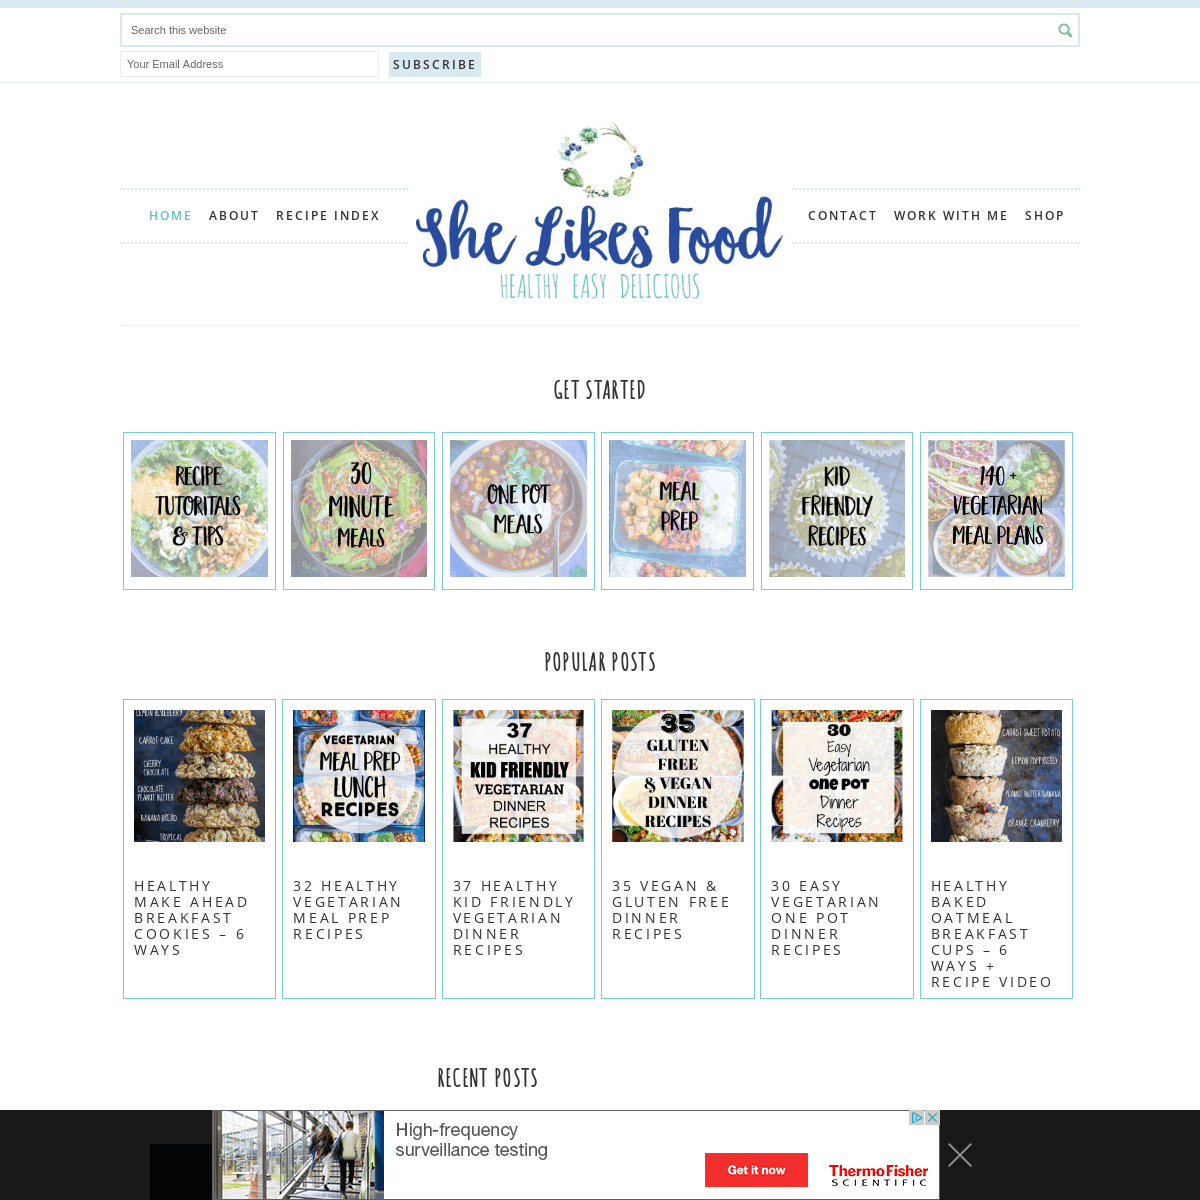 A complete backup of https://shelikesfood.com